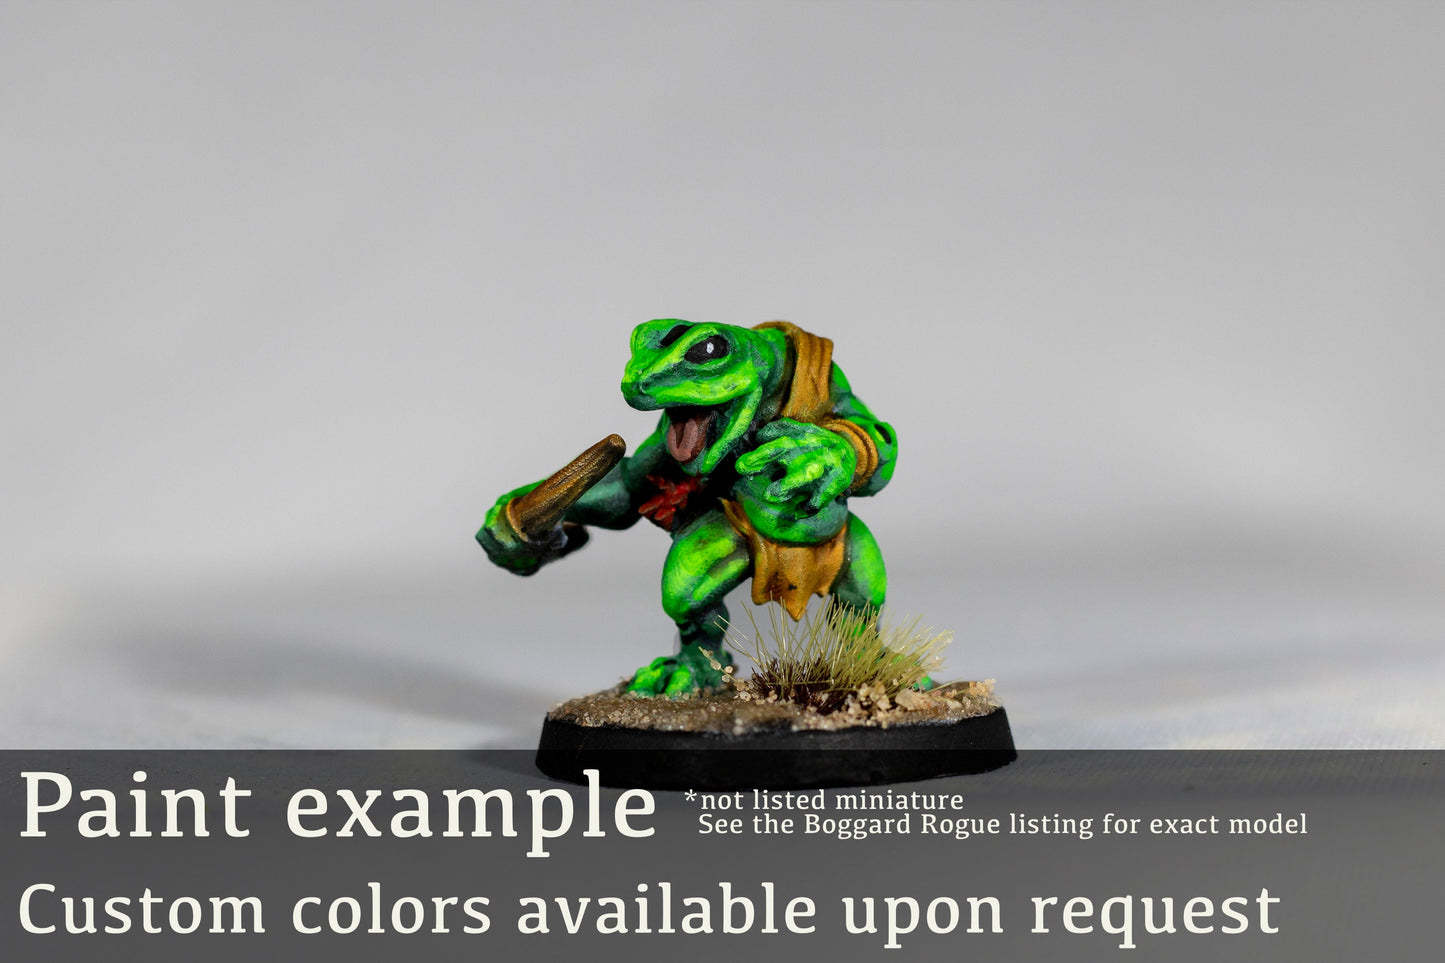 Mh'Azhod - Cast n Play Printed Miniature | Dungeons & Dragons | Pathfinder | Tabletop